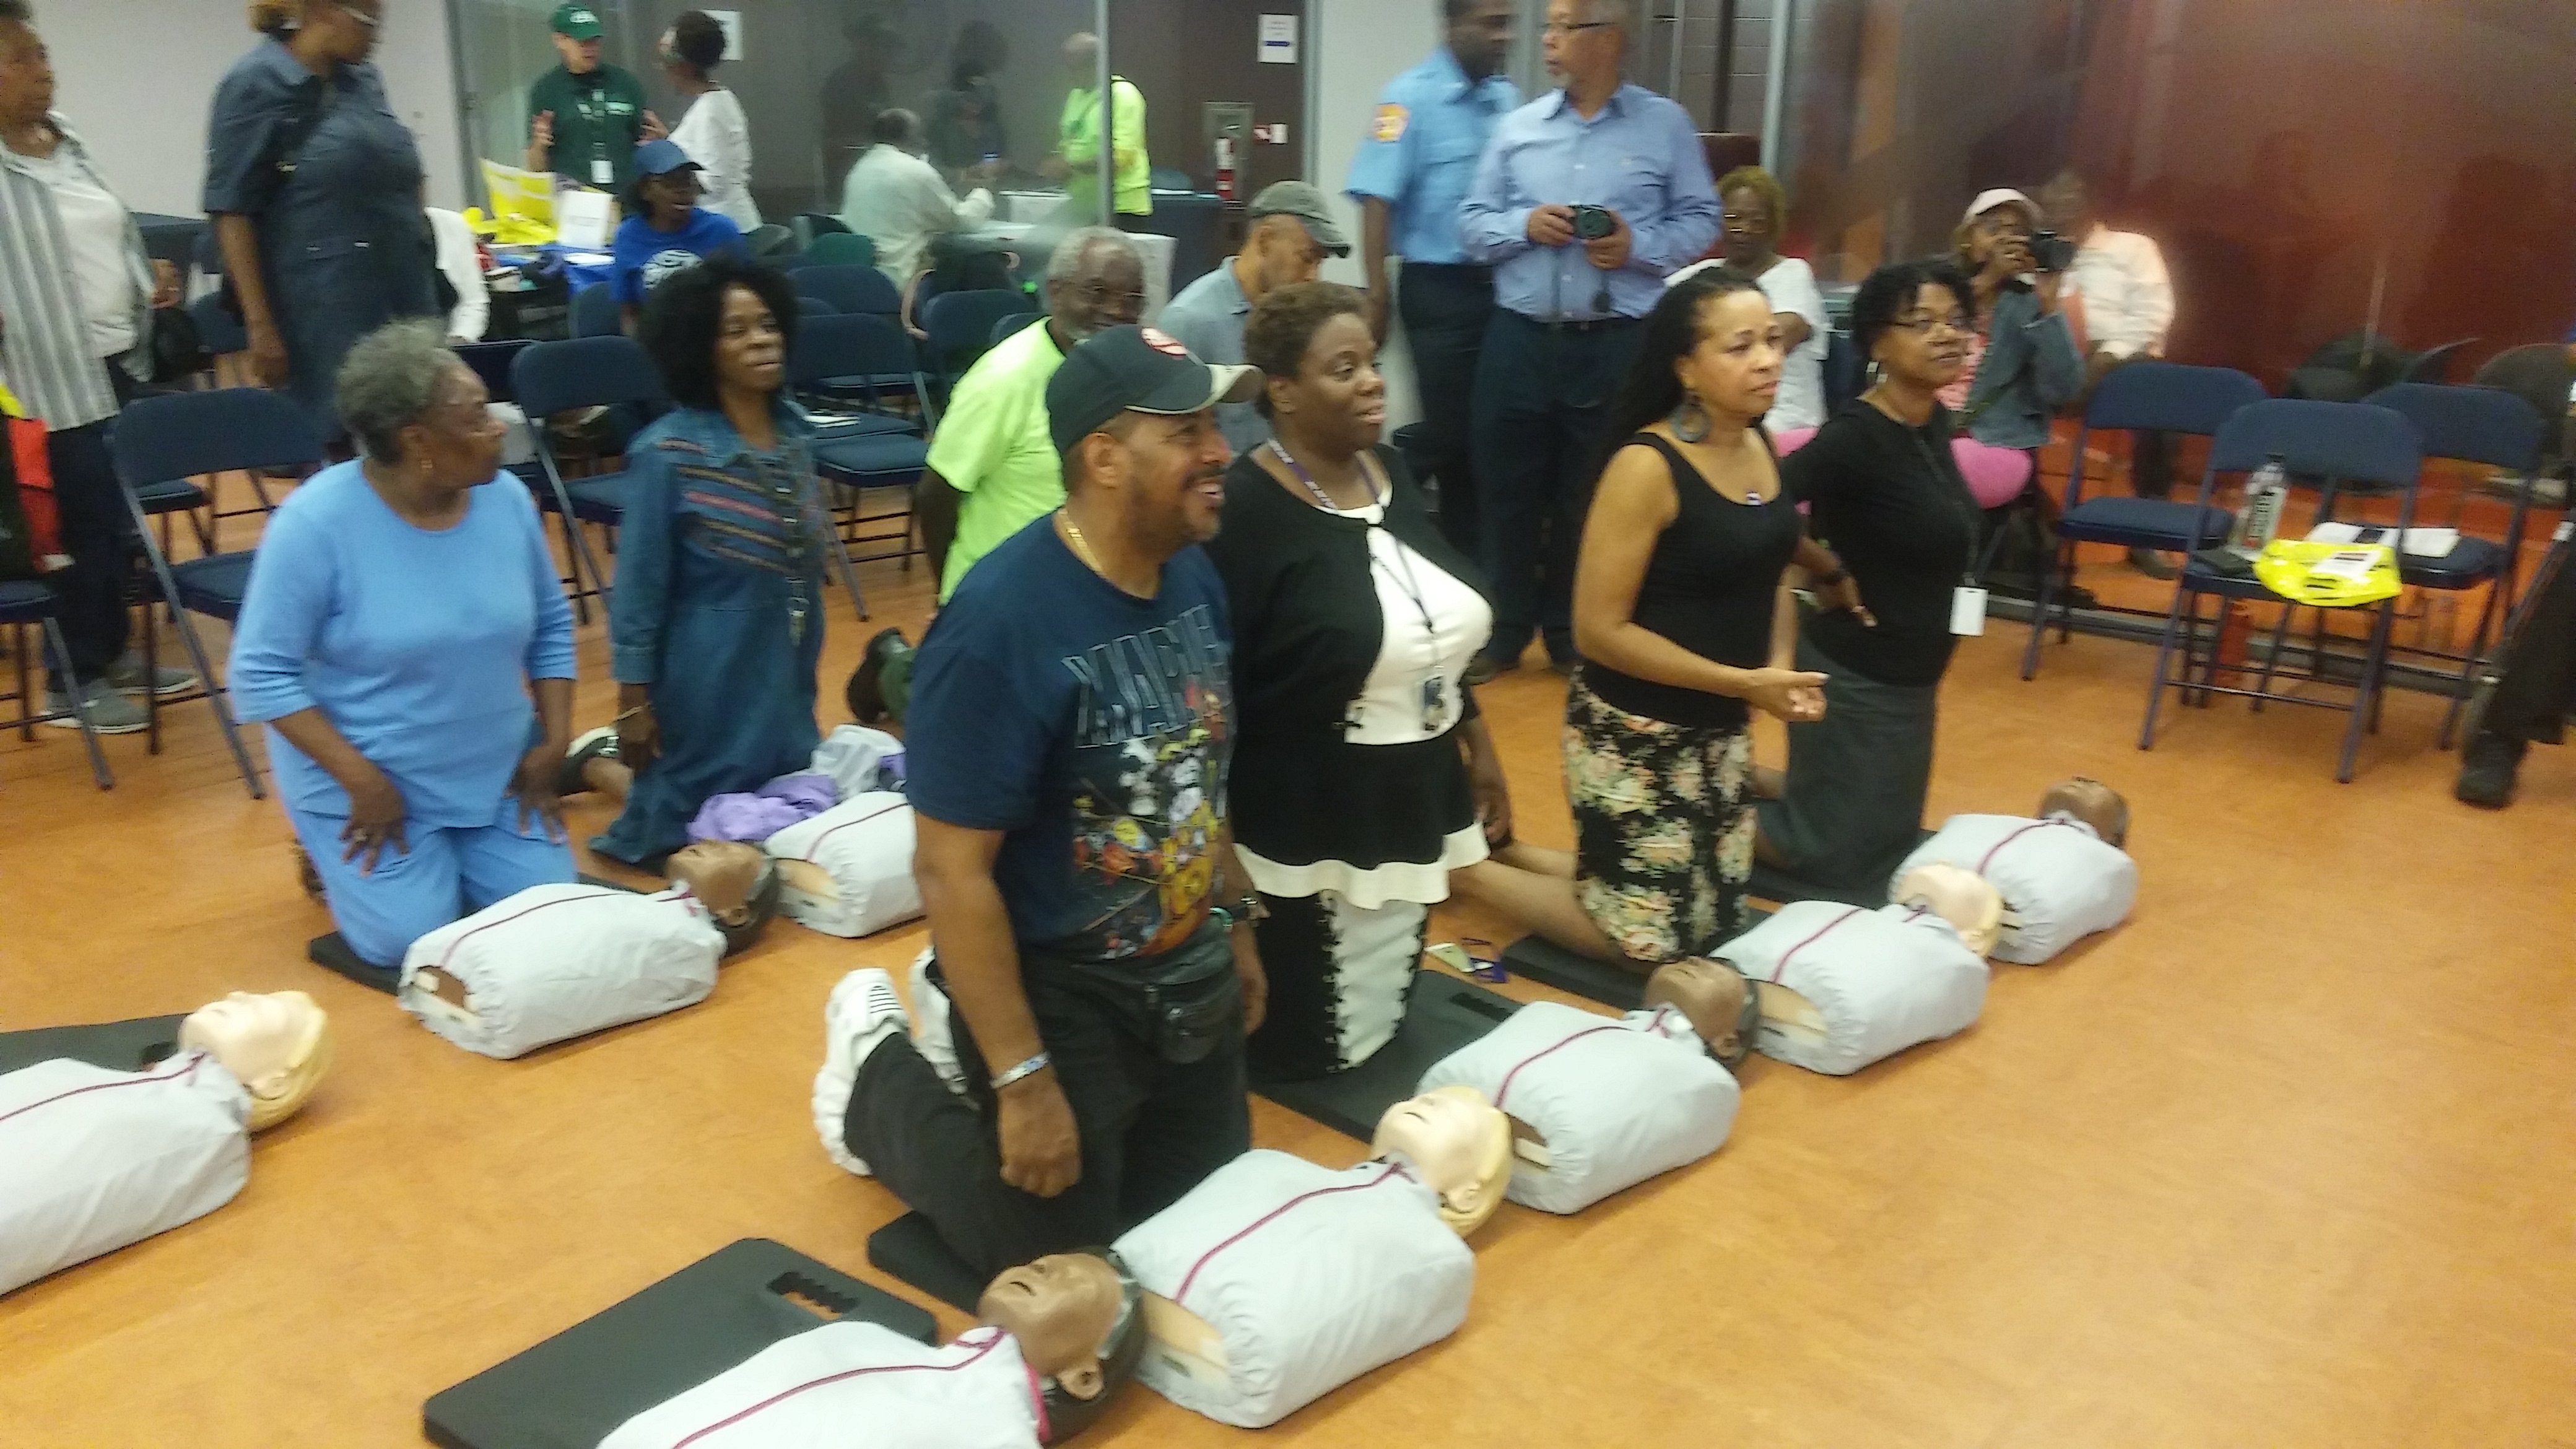 Group of people practicing cpr